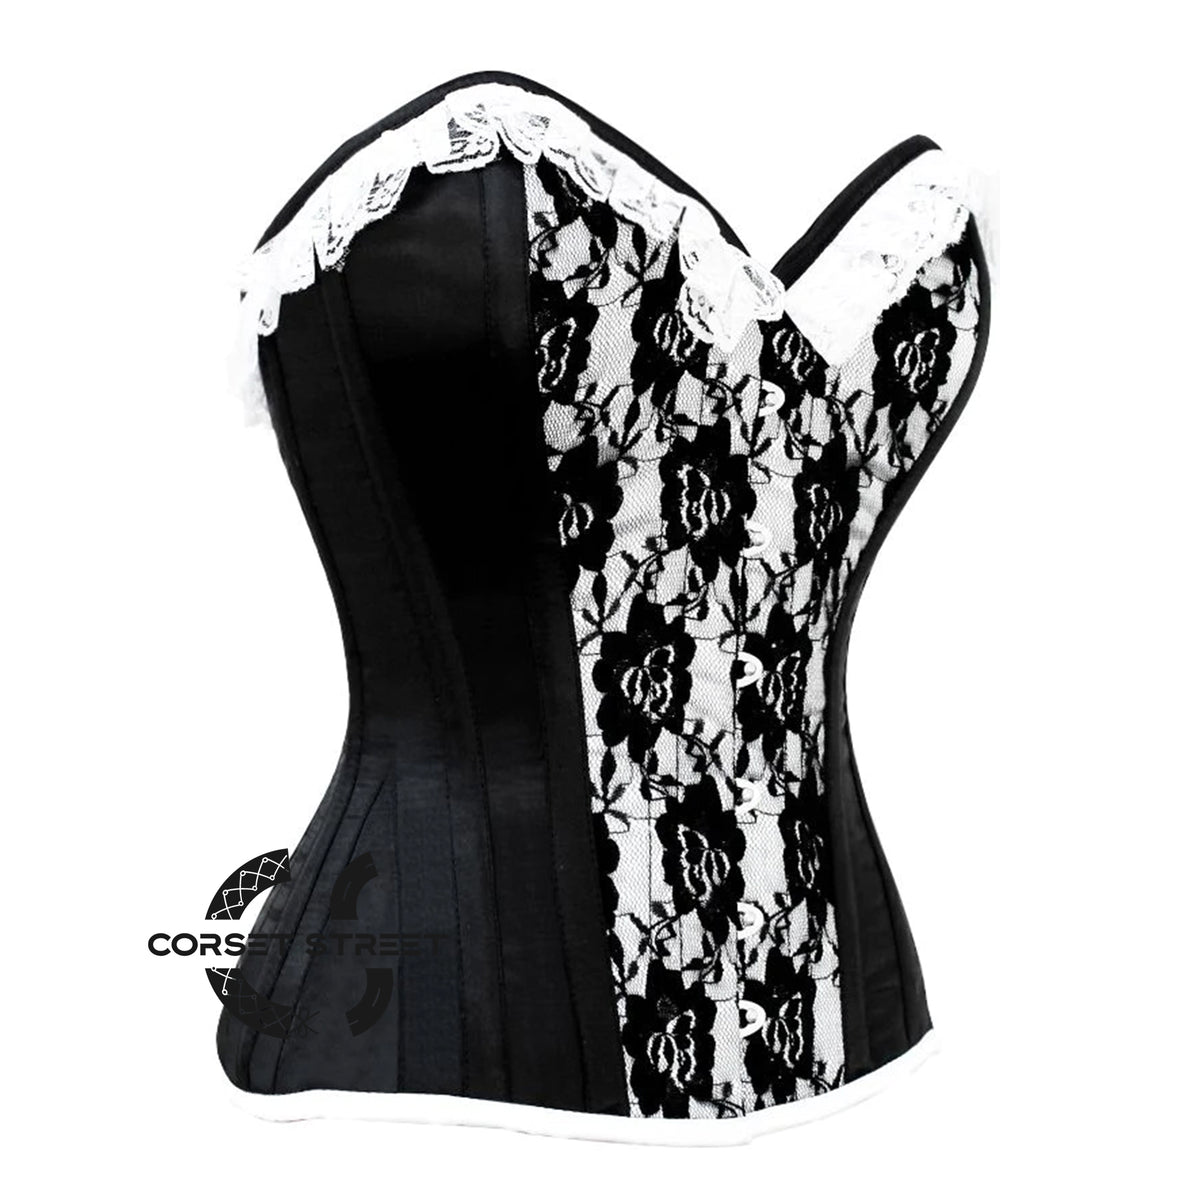 Black And White Brocade With Front Busk Overbust Corset